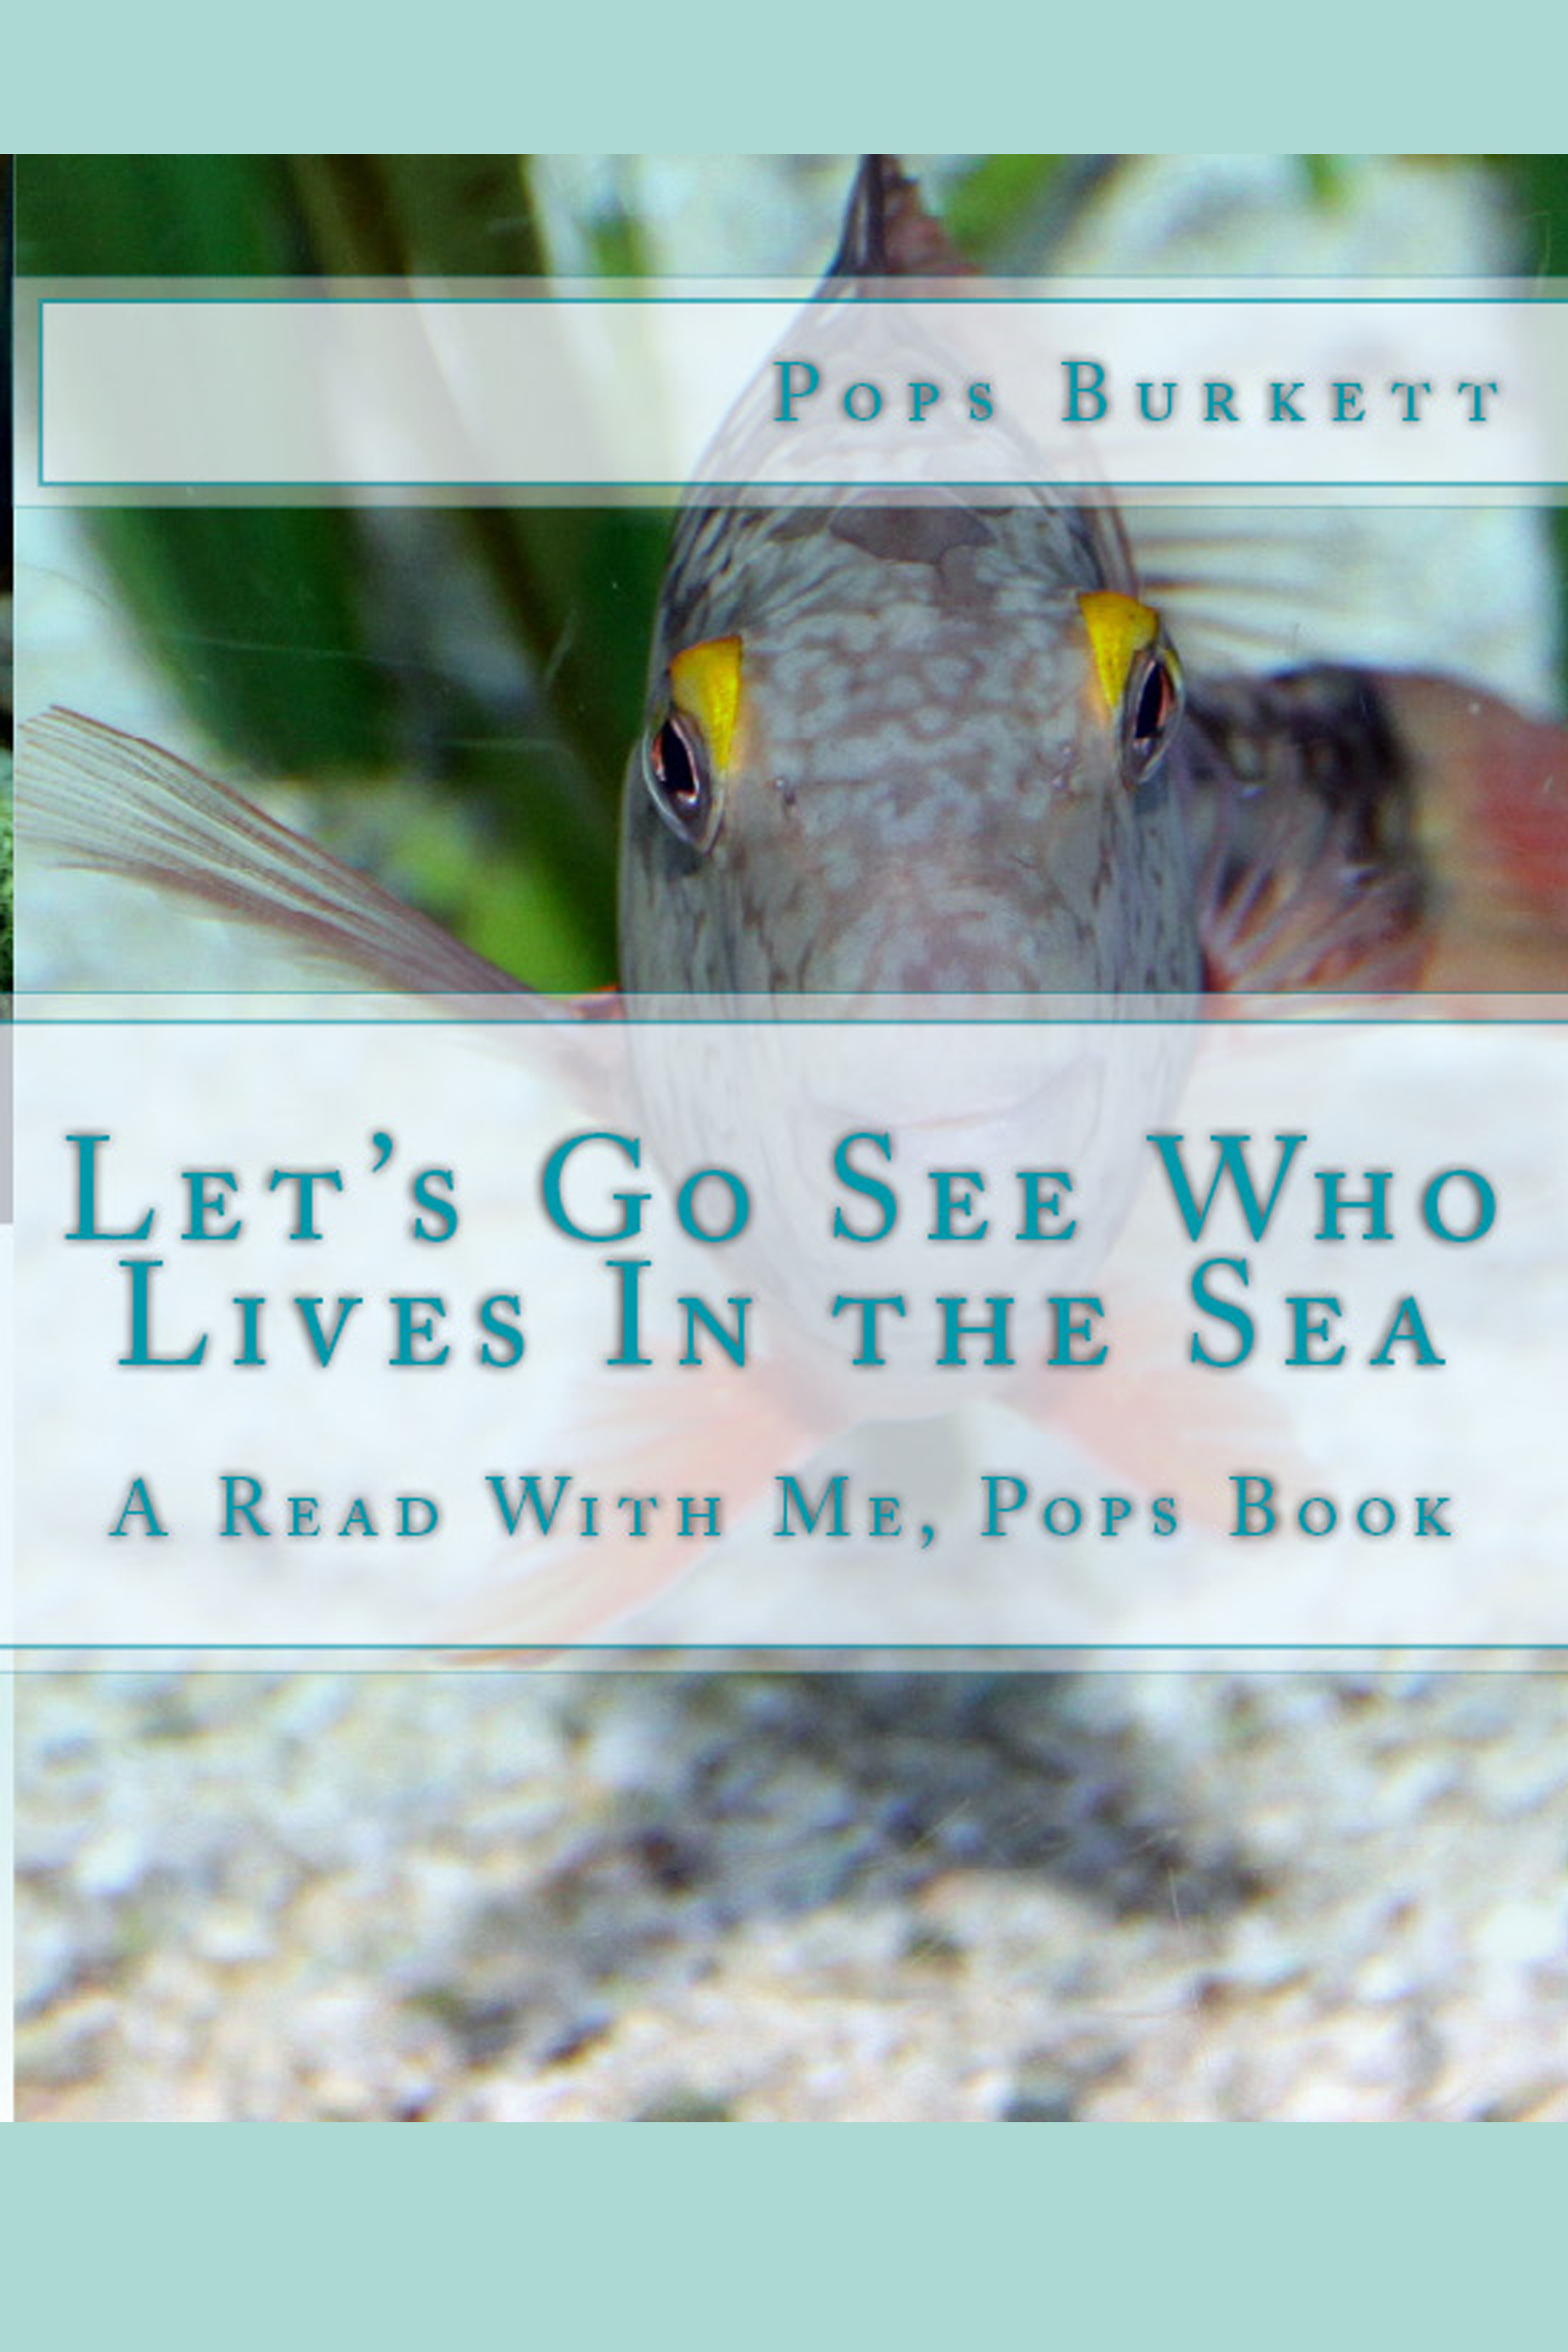 Let's Go See Who Lives In the Sea!